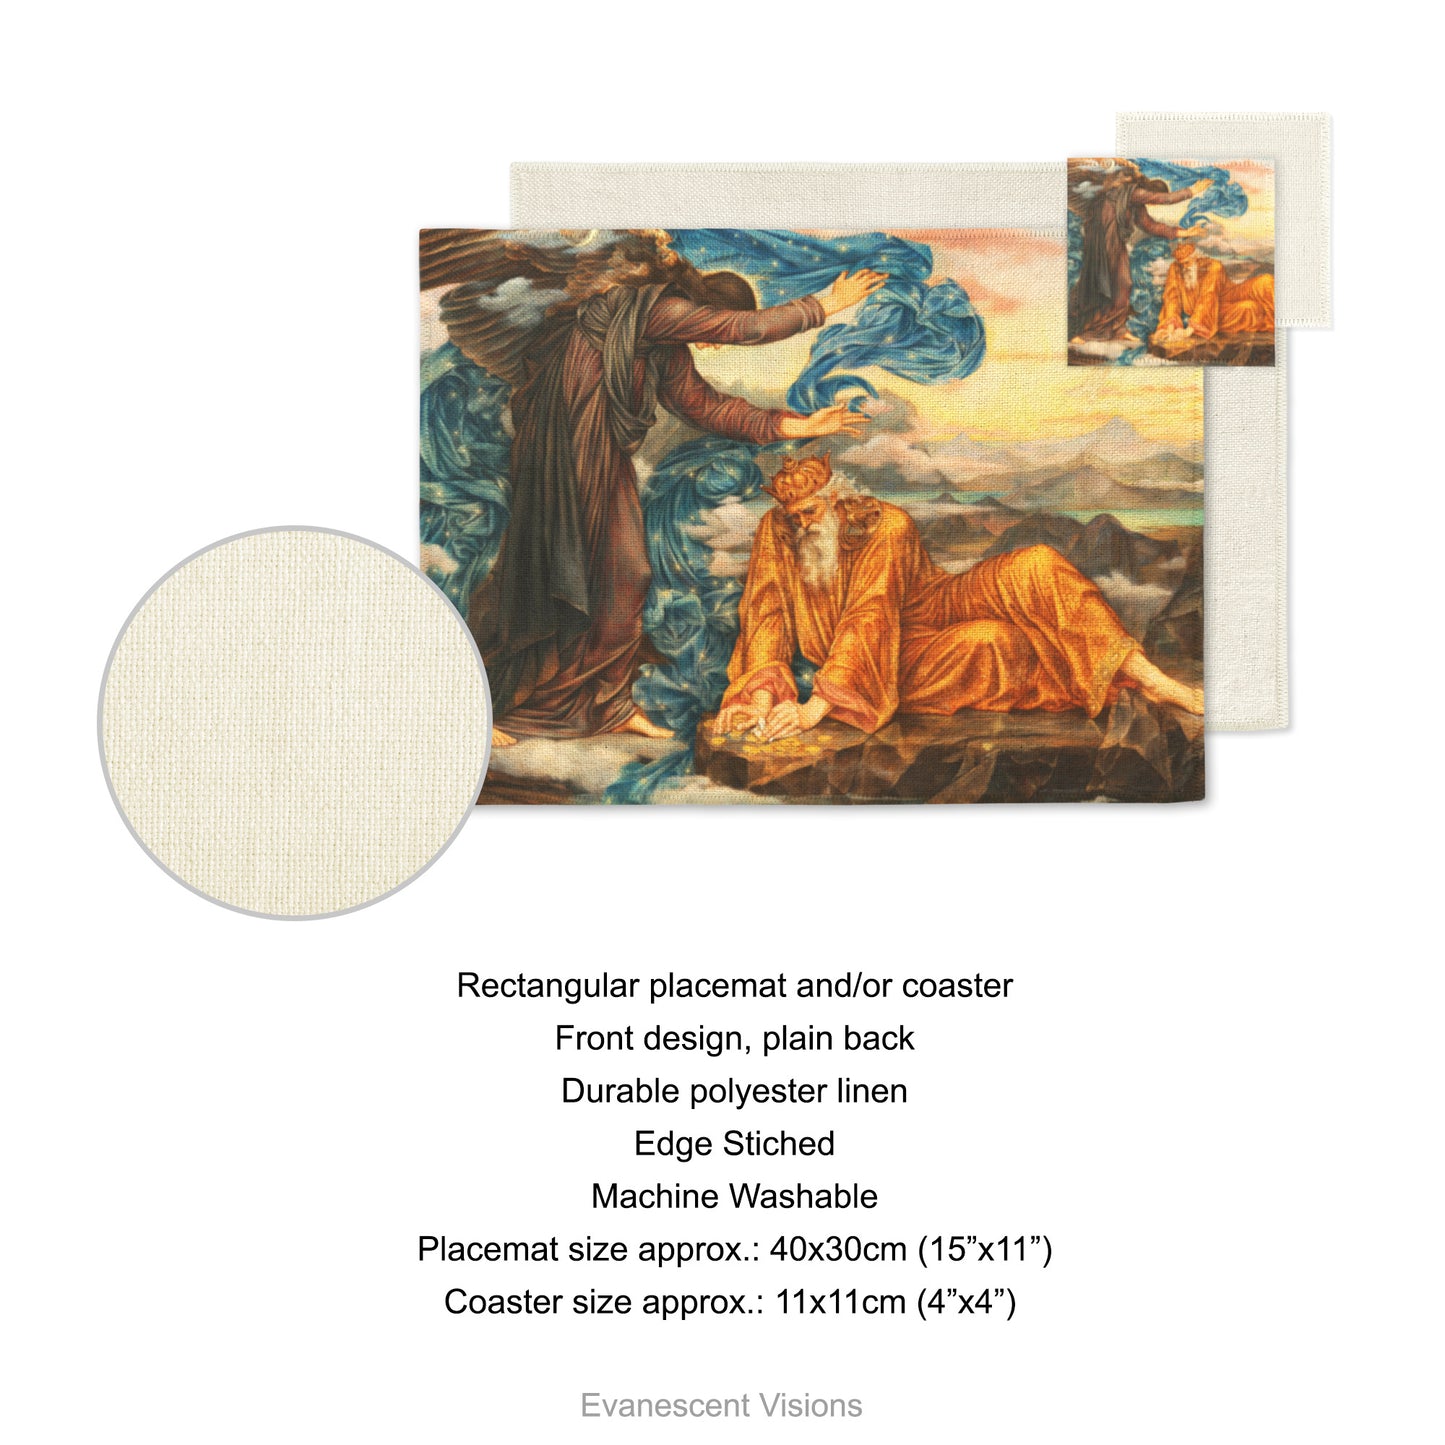 Placemat and coaster with design of 'Earthbound' by artist Evelyn De Morgan.  Product details for placemat and coaster. Front design, plain back, durable polyester linen, edge sticked, machine washable. Placemat size approx 40x30cm (15"x11"). Coaster size approx 11x11cm (4"x4")